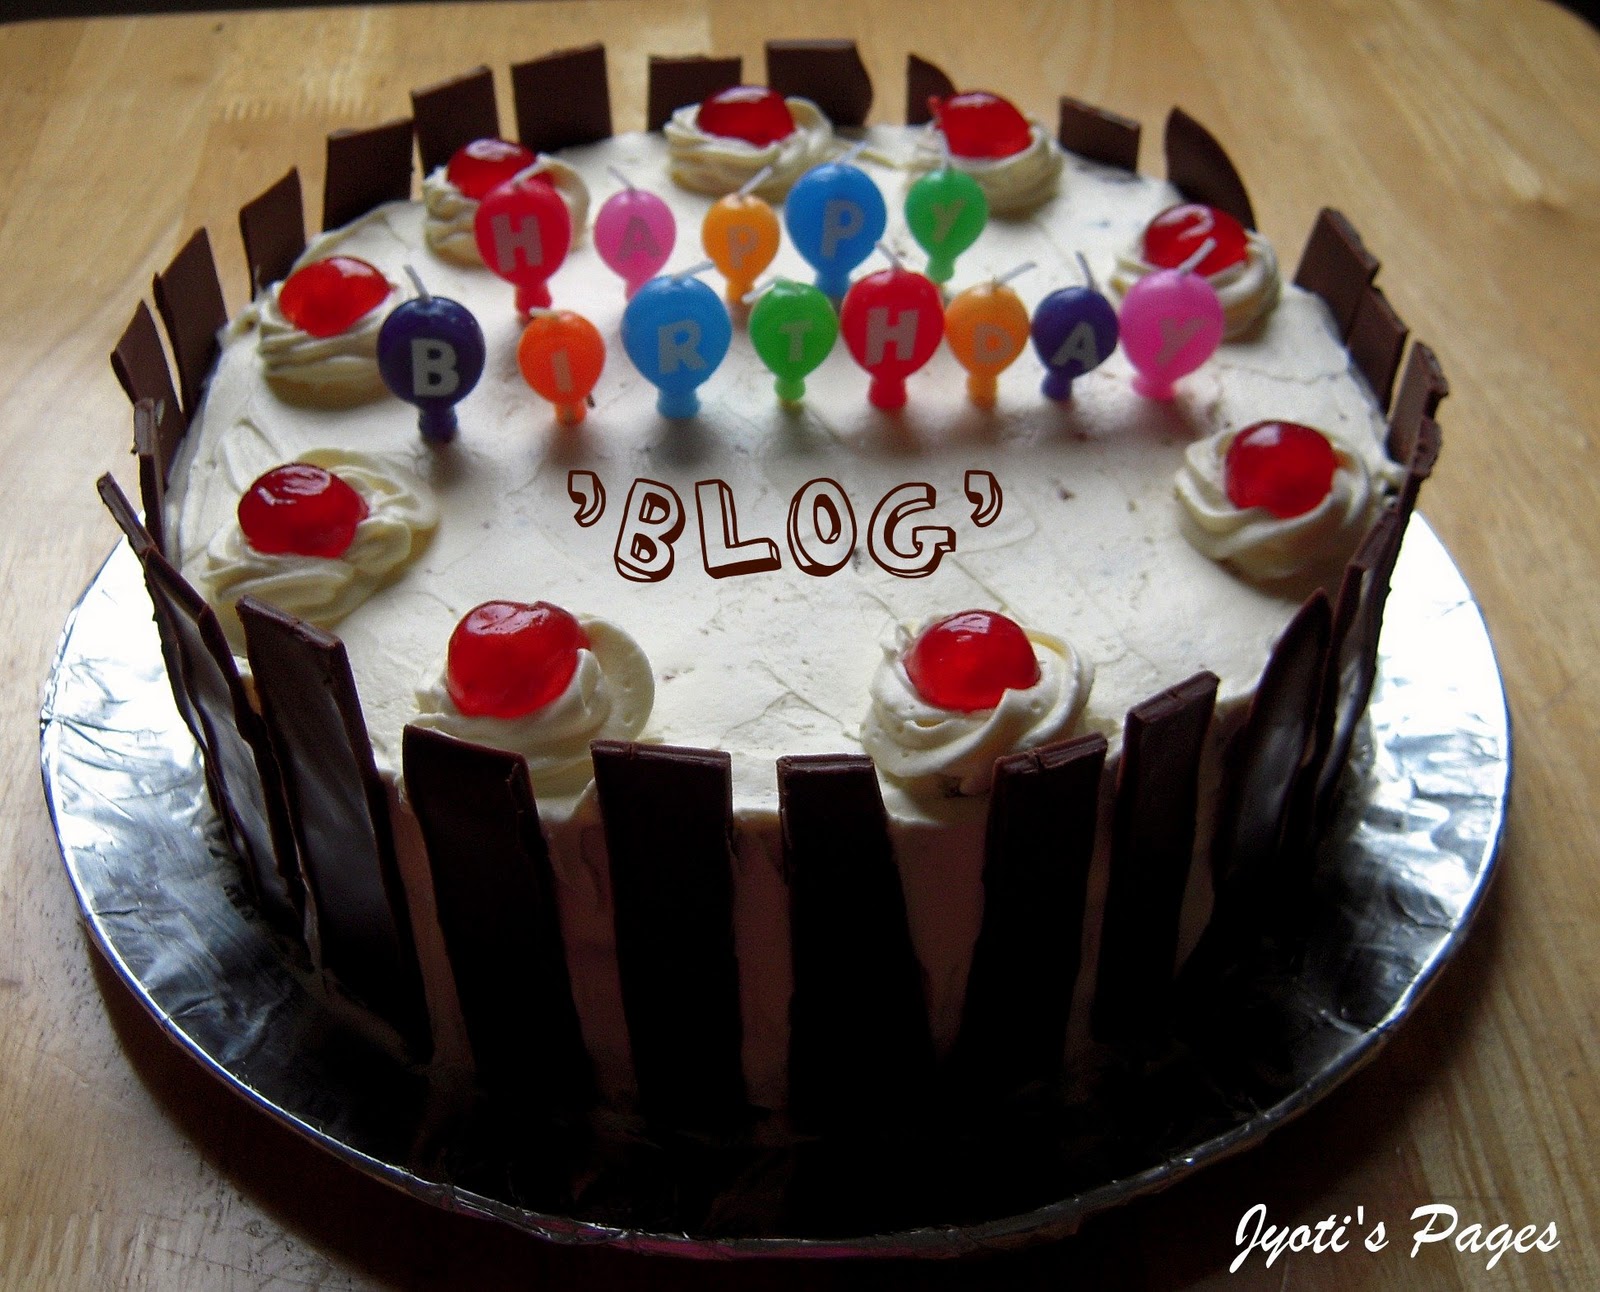 Jyoti's Pages: Celebrating one year of 'Pages' with Eggless Black...